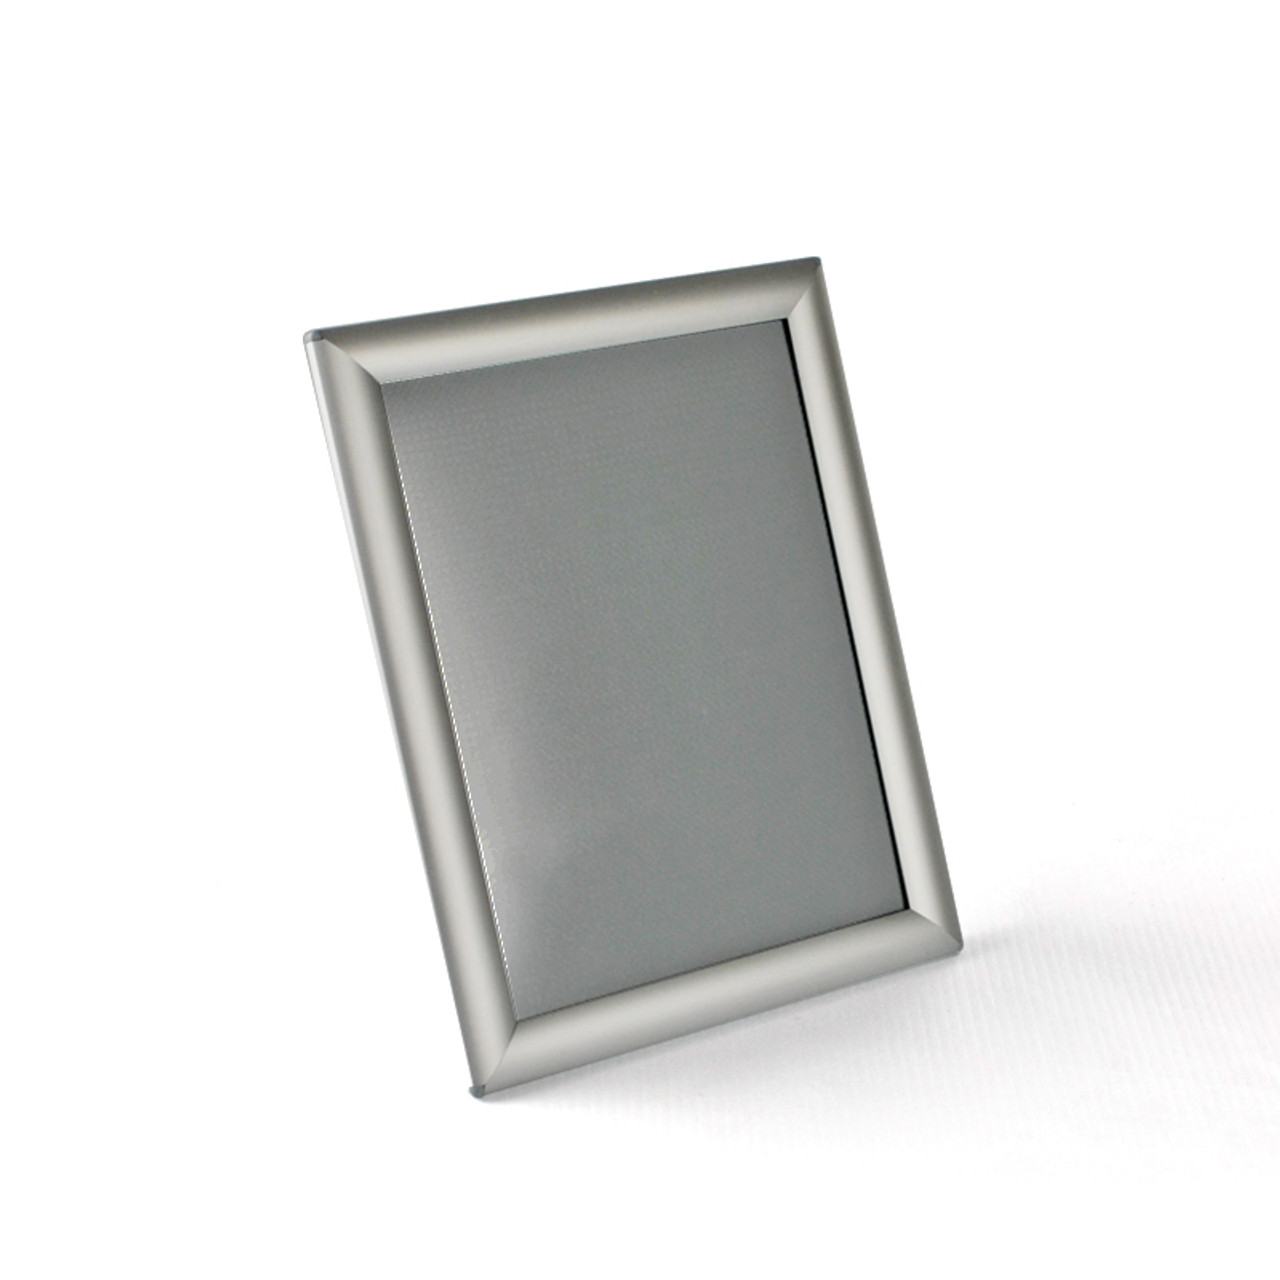 8.5" x 11" Vertical/ Horizontal Snap Frame for Counter or Wall Display,  10-Pack Azar Displays